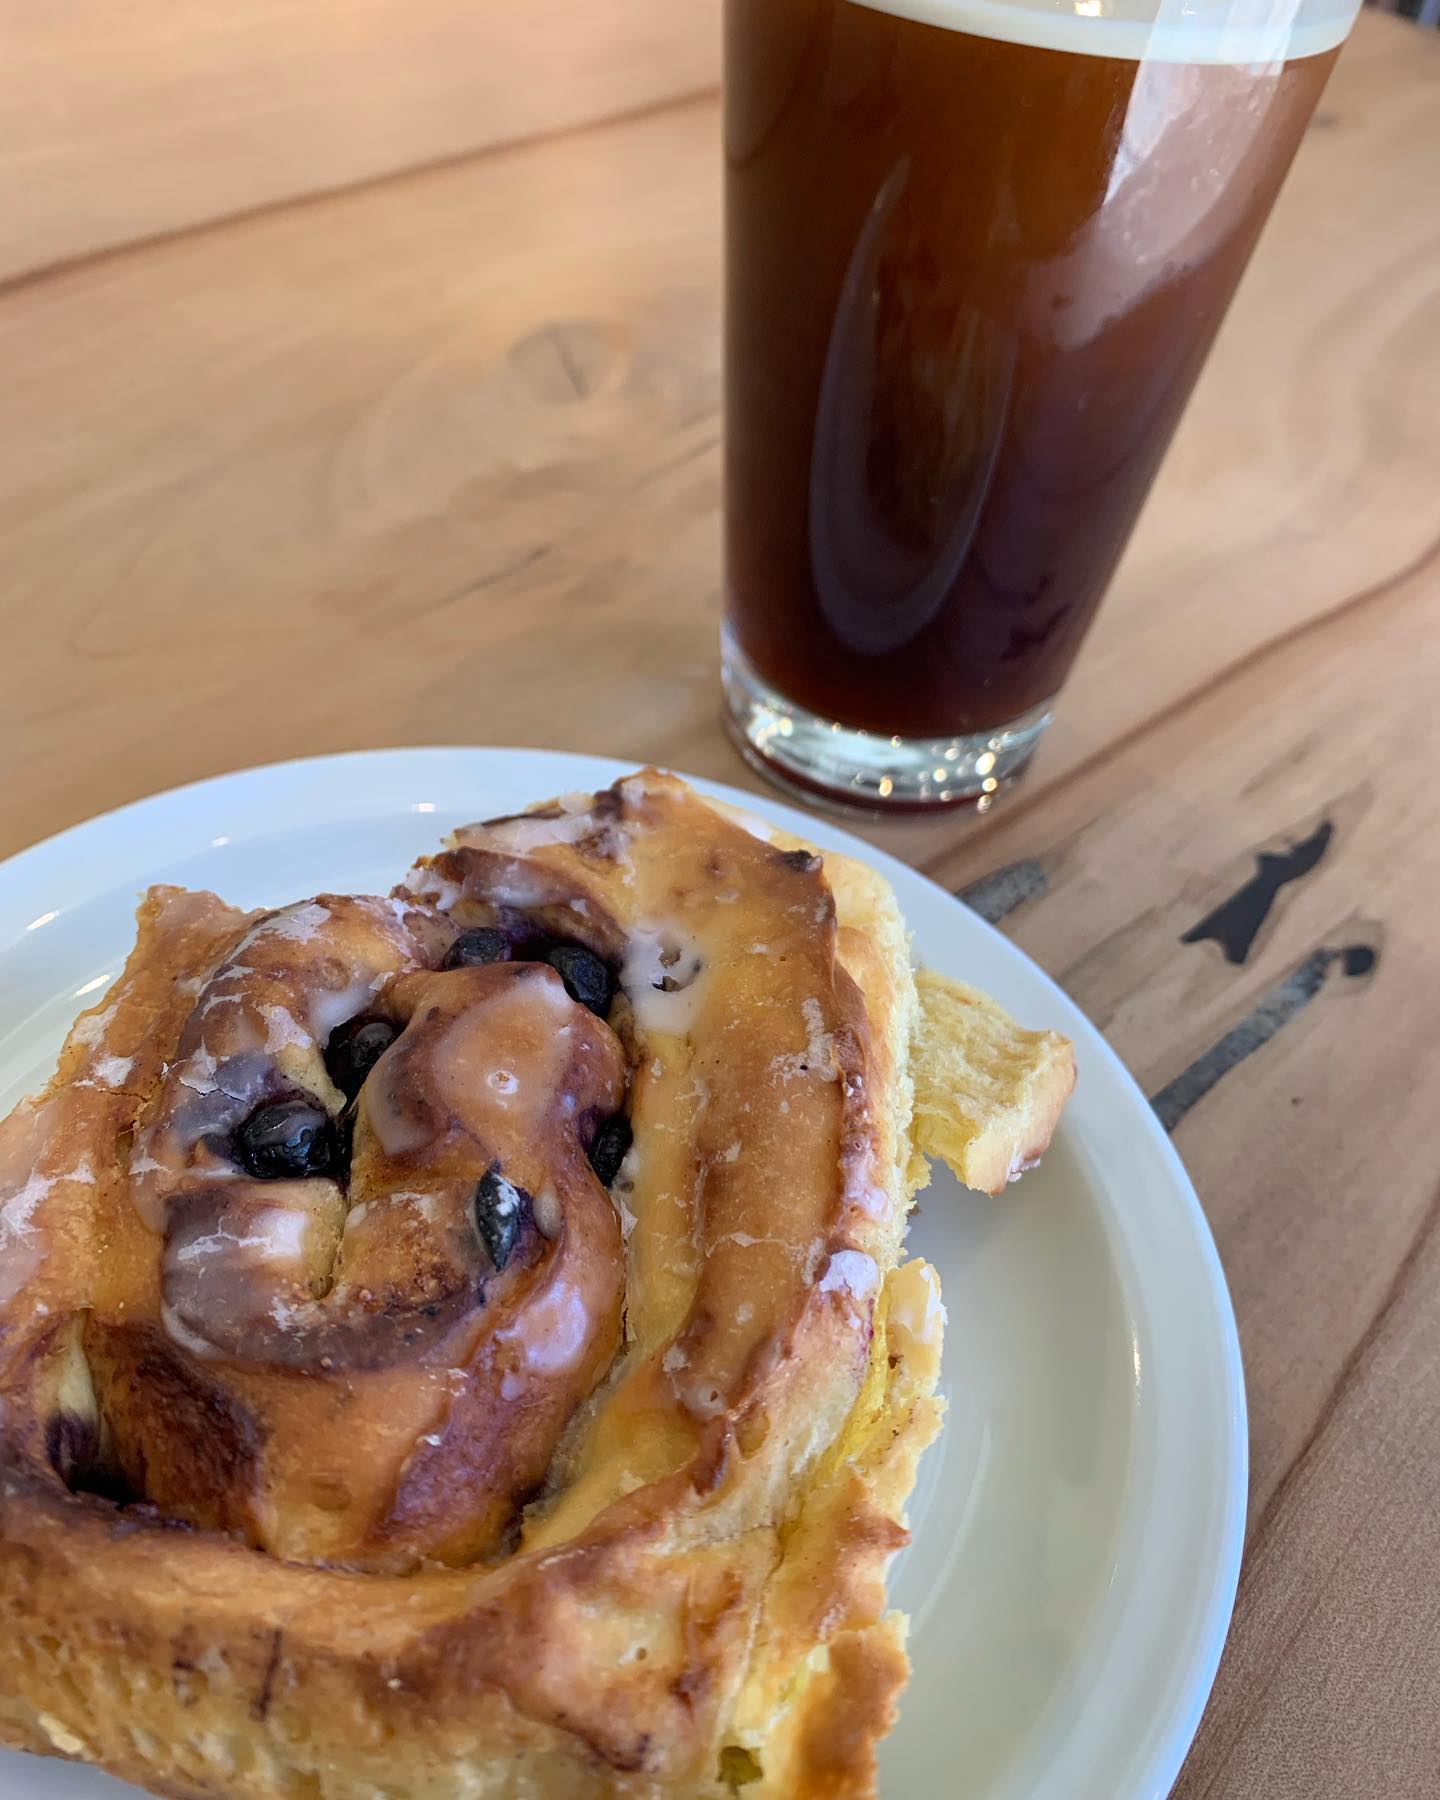 Todays post ride snack is a blueberry cinnamon bun and a nitro cold brew courtesy of @esquimaltroasting